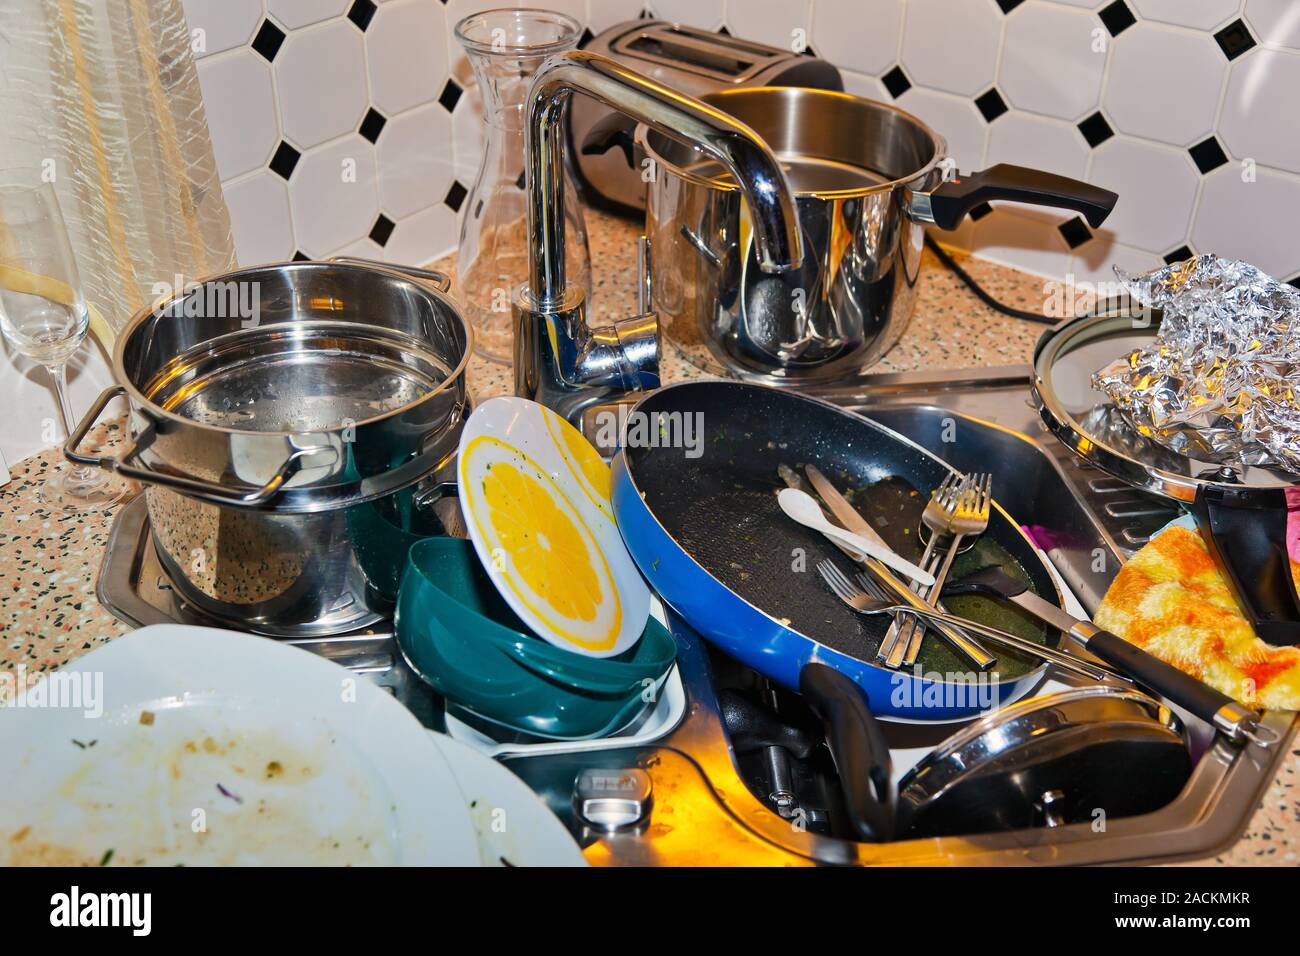 Untidy Kitchen High Resolution Stock Photography and Images - Alamy